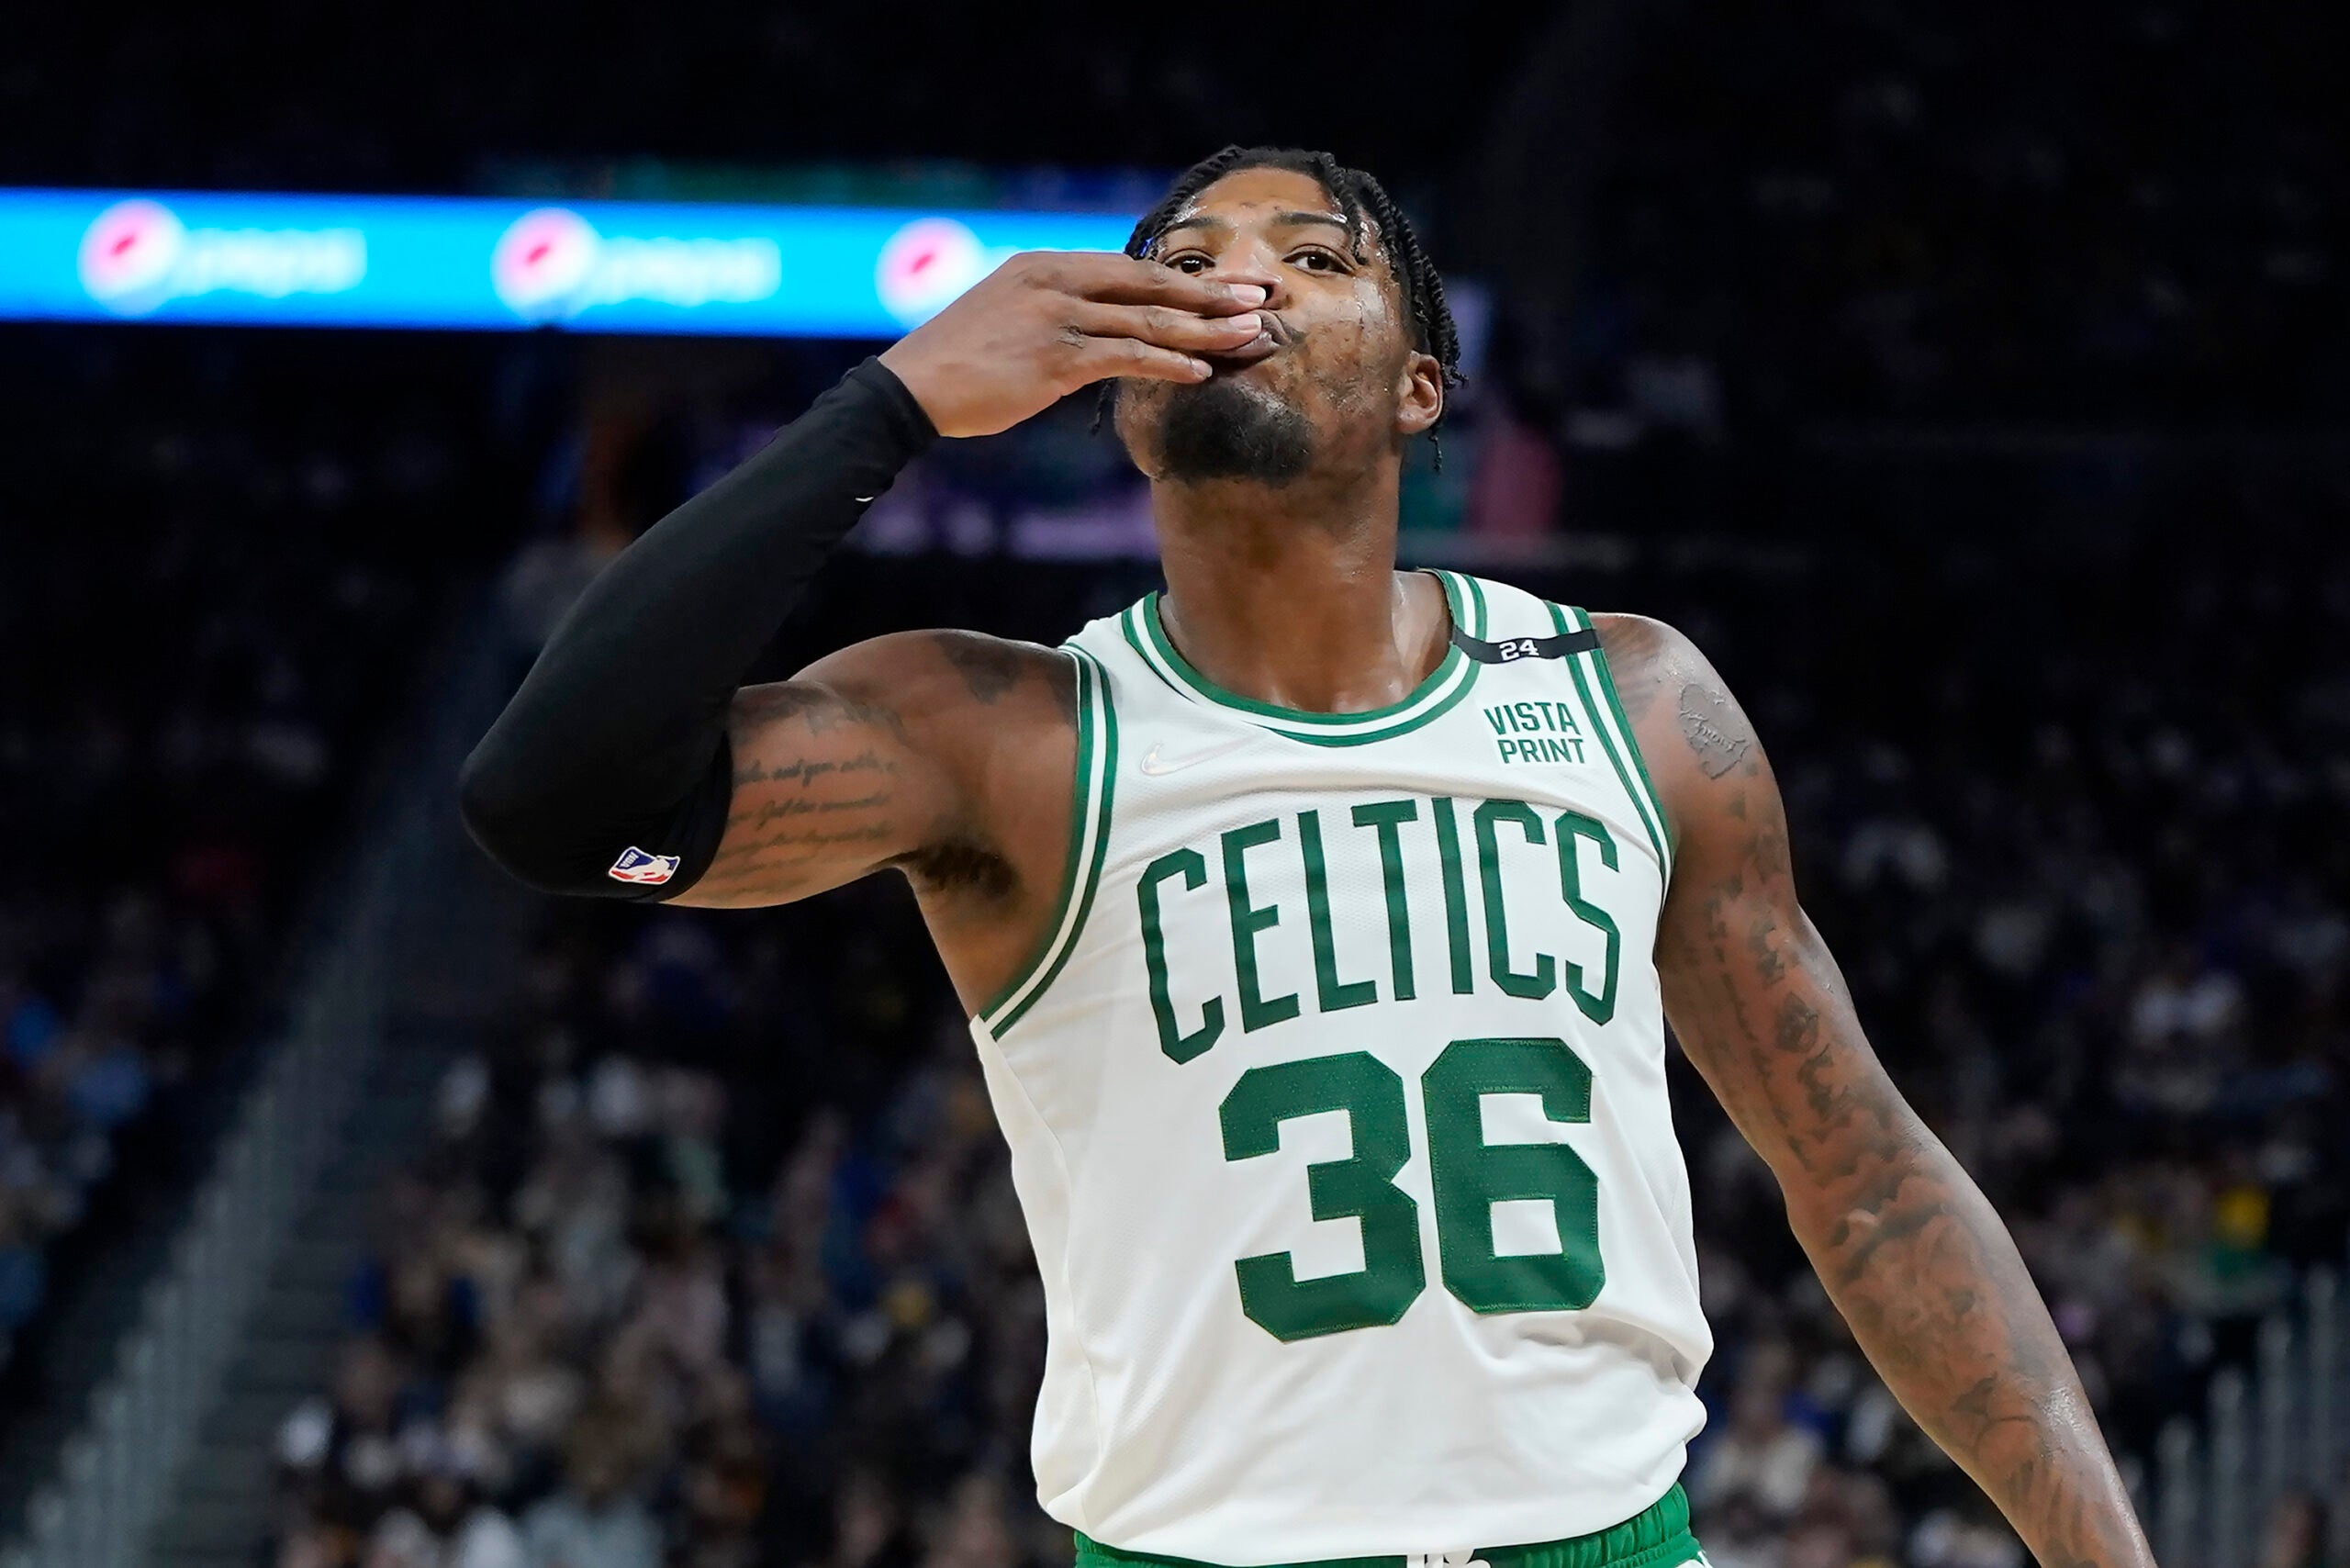 Celtics' Marcus Smart named 2022 Defensive Player of the Year by NBA